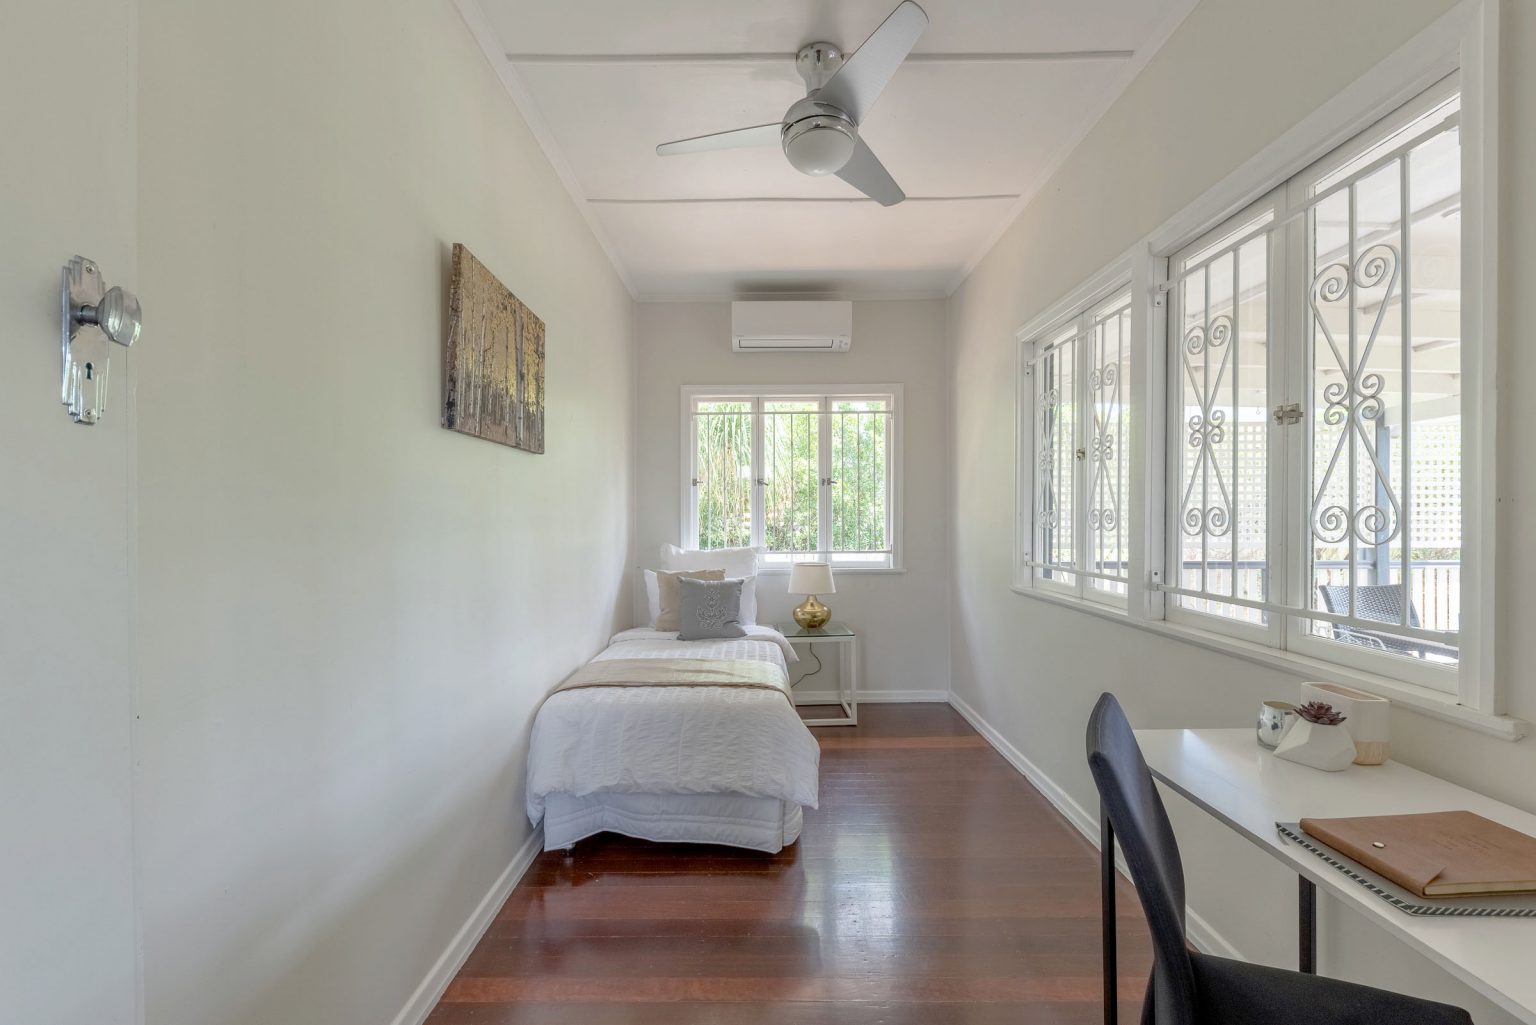 Real Estate Airbnb property photos photography Gold Coast